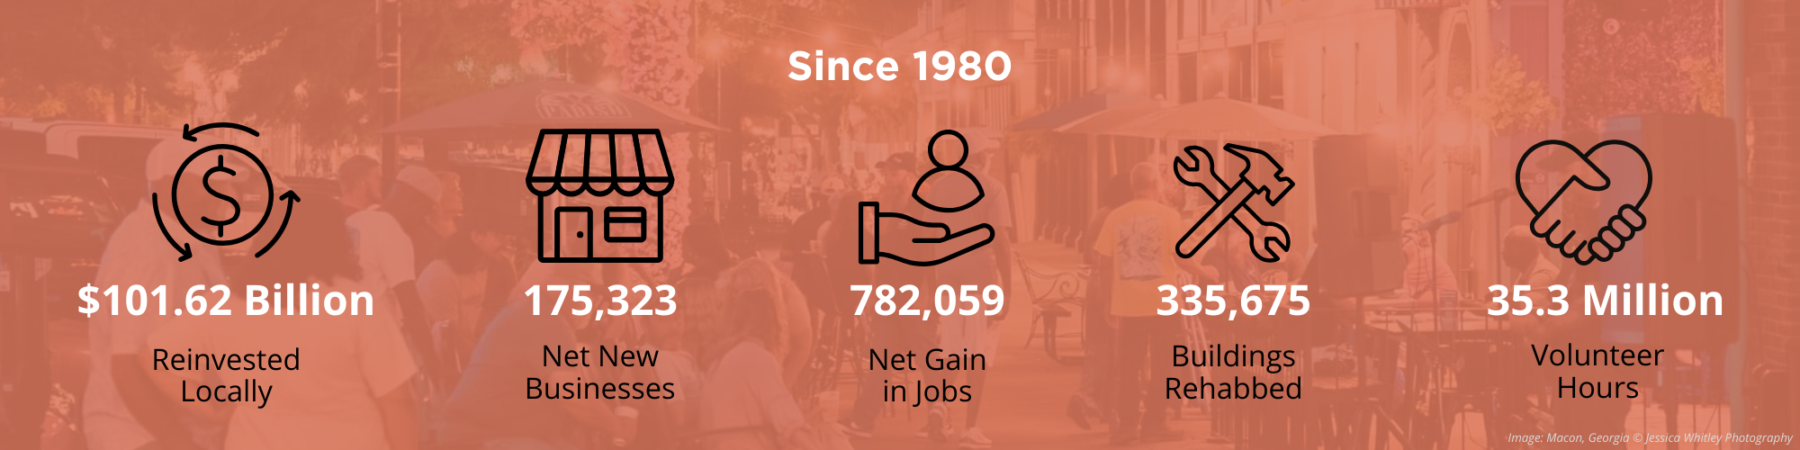 Since 1980, the Main Street Movement has resulted in $107.62 billion reinvested locally, 175,323 net new businesses, 782,059 net gain in jobs, 335,675 buildings rehabbed, and 35.3 million volunteer hours.